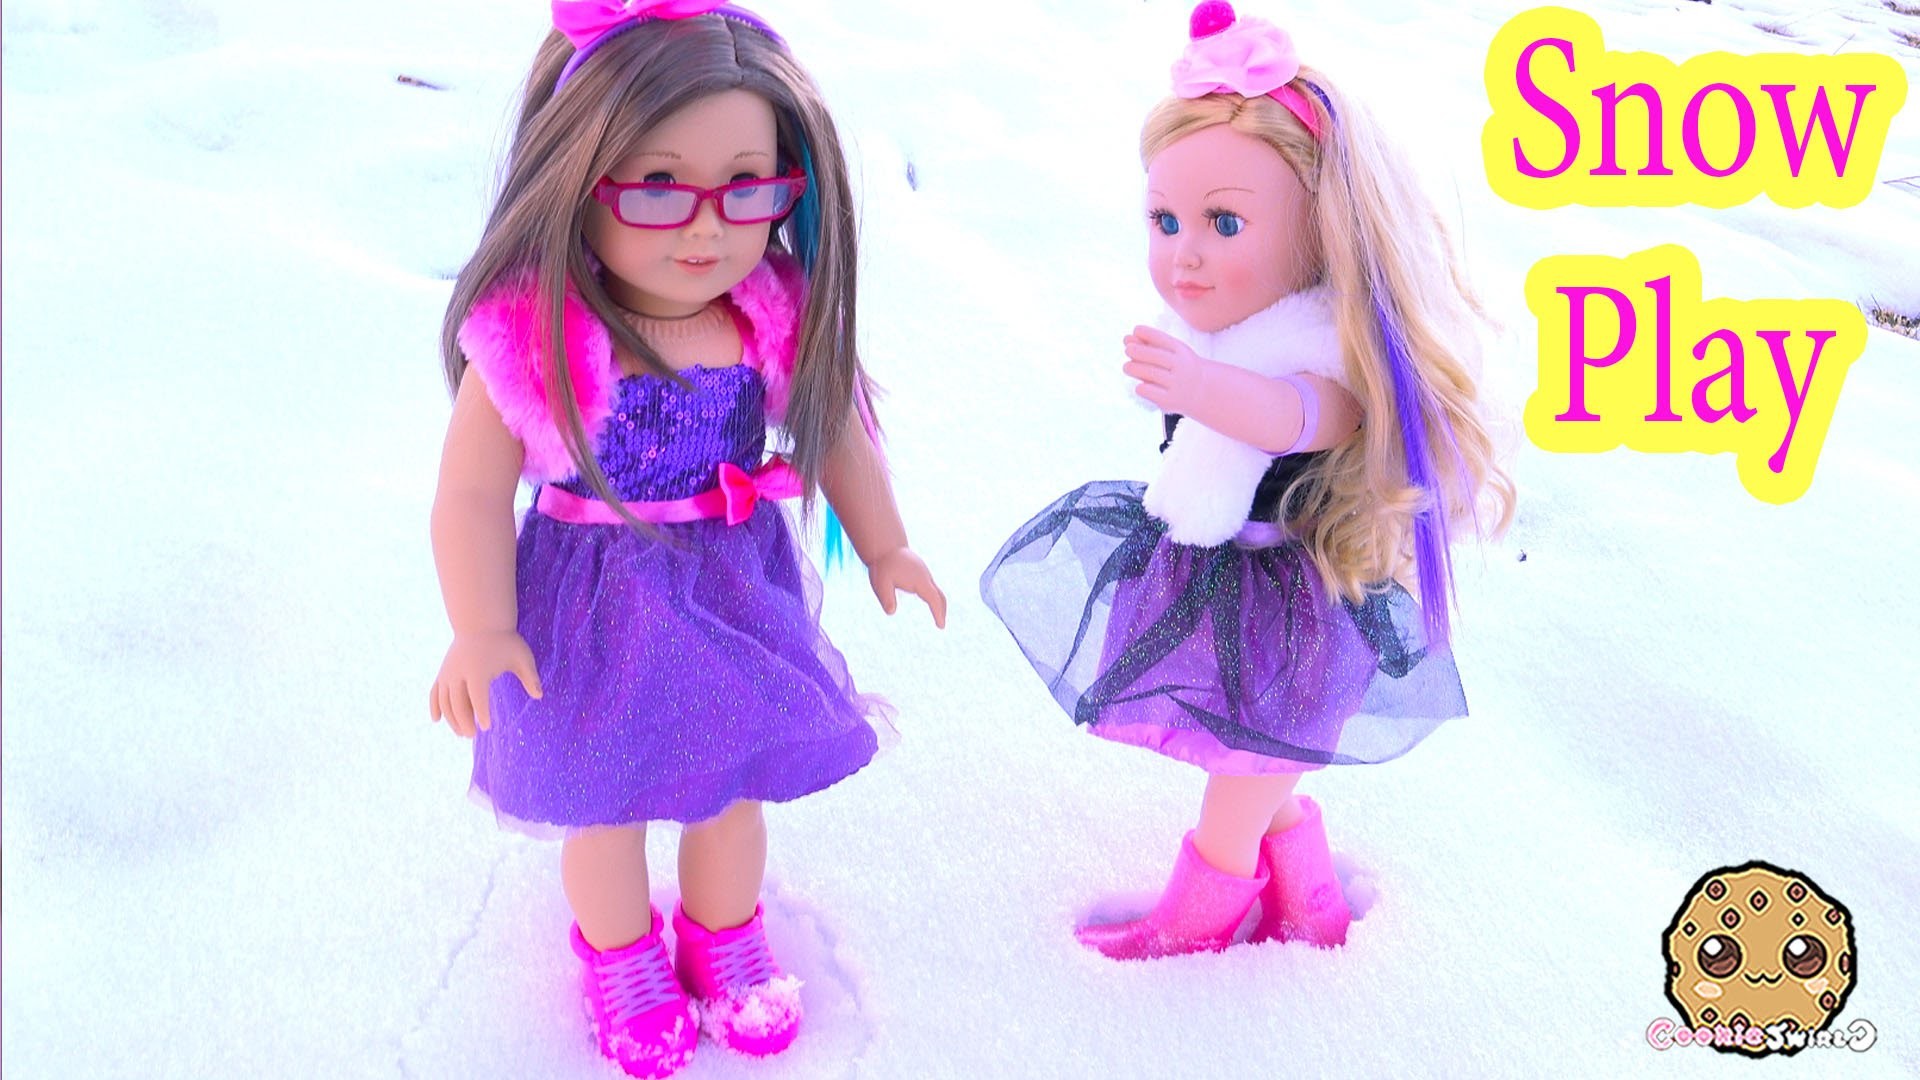 1920x1080 Snow Play Boots + Dresses Clothing Review for American Girl + My Life As  Cupcake Baker Doll - YouTube